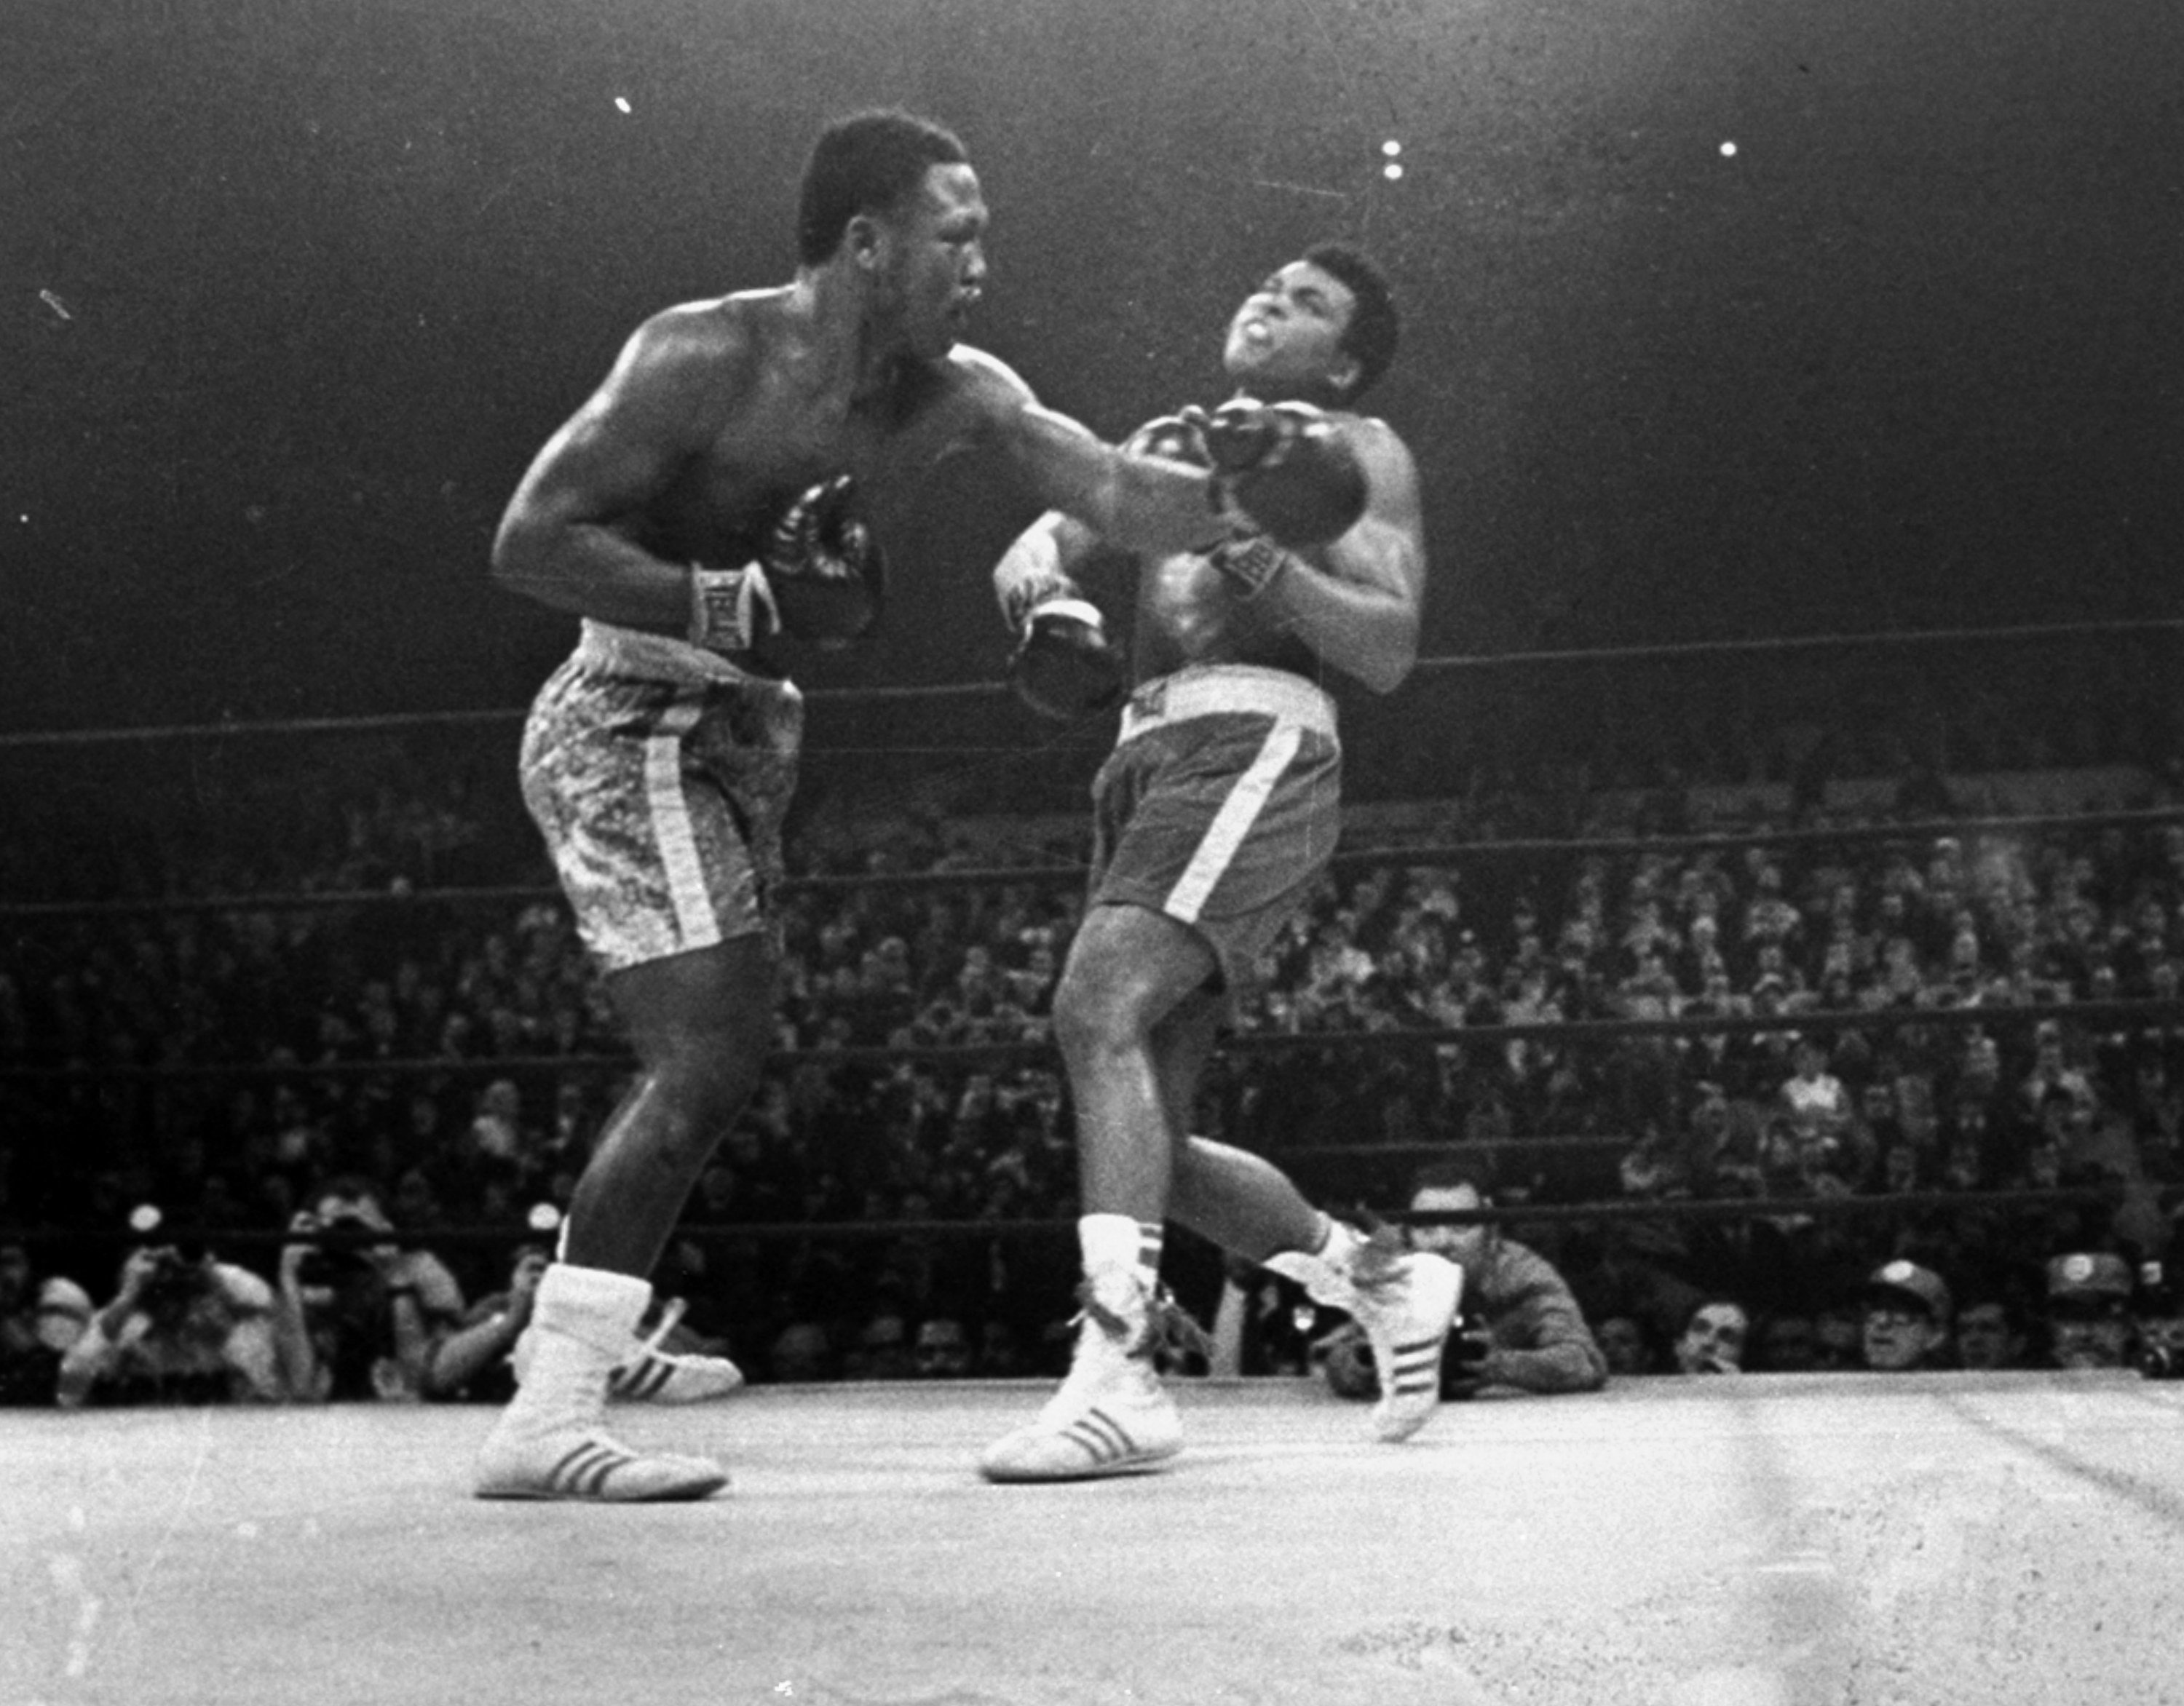 FILE - In this March 8, 1971, file photo, boxer Joe Frazier, left, hits Muhammad Ali during the 15th round of their heavyweight title fight at New York's Madison Square Garden. Michigan States offensive line expects a fight when it plays Alabamas talented defensive line on Thursday night, Dec. 31, 2015 in the Cotton Bowl. So why not prepare by watching one of the greatest fights of all time? Michigan State offensive line coach Mark Staten had his unit watch and score the 1971 Muhammad Ali-Joe Frazier heavyweight title match dubbed the Fight of the Century. (AP Photo, File)